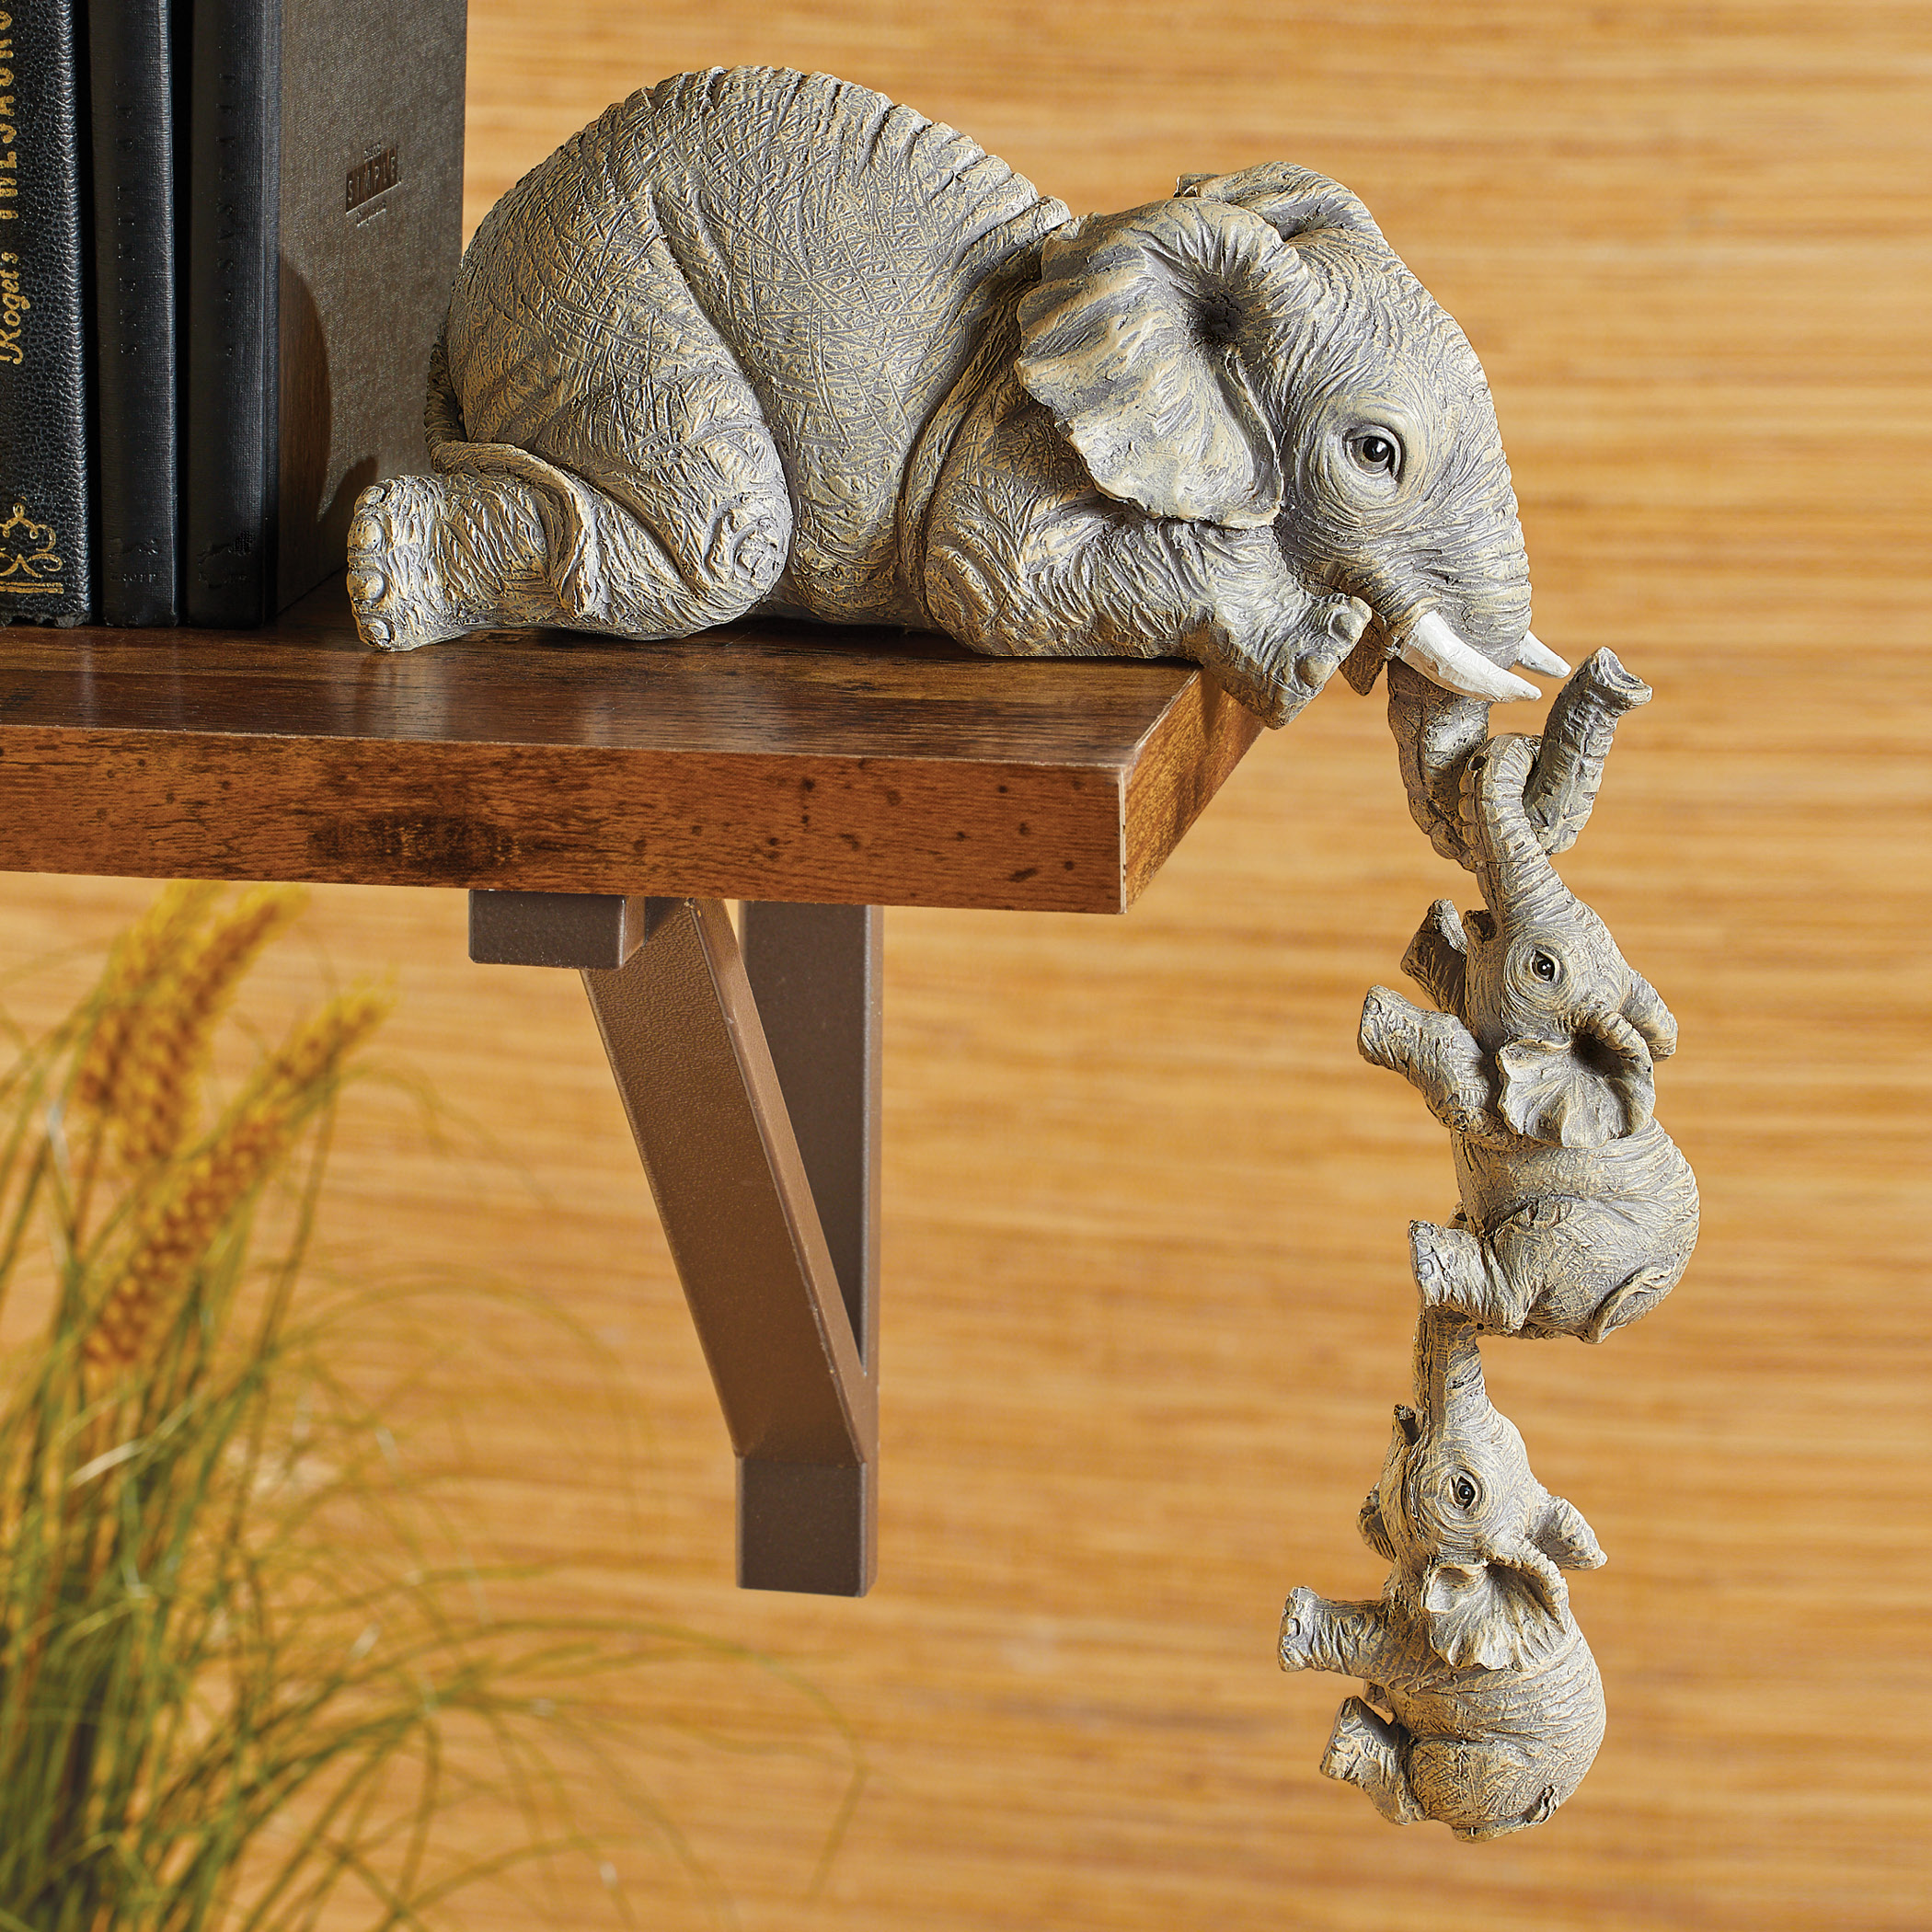 Collections Etc Full Size Elephant Sitter Hand-Painted Figurines - Set of 3, Mother and Two Babies Hanging Off The Edge of a Shelf or Table - image 2 of 2